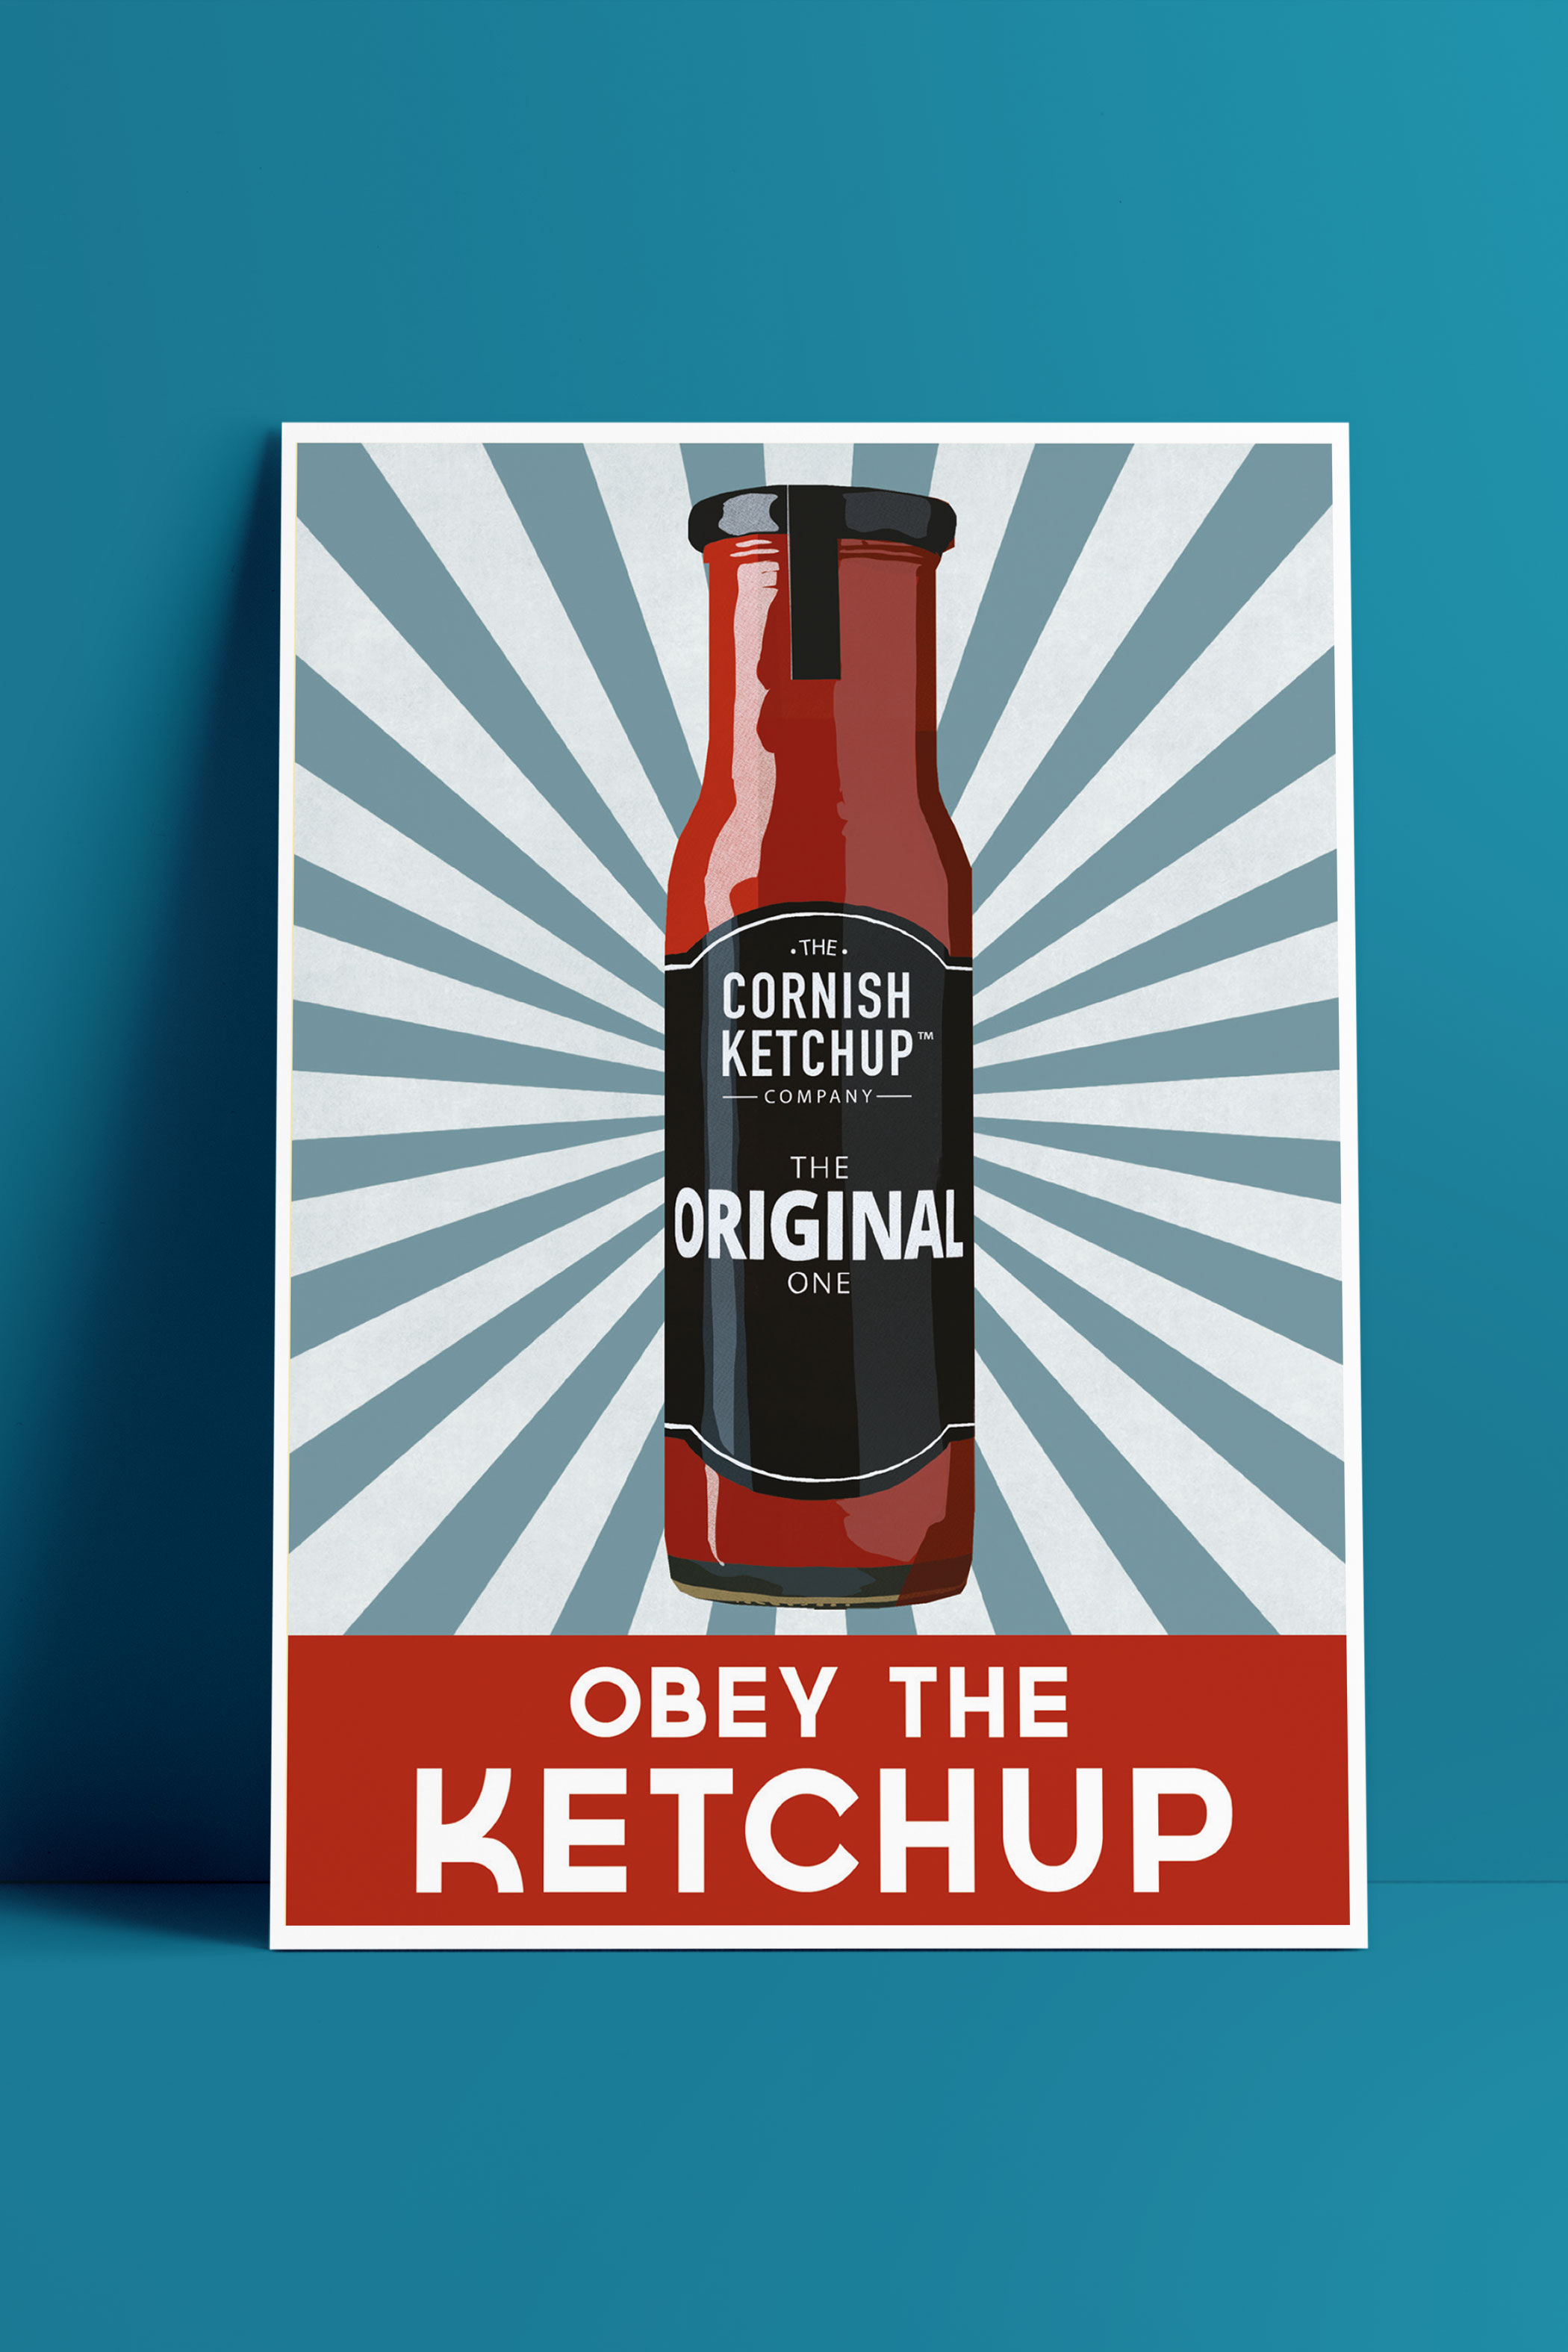 poster design with large bottle of original ketchup and text reading 'obey the ketchup'